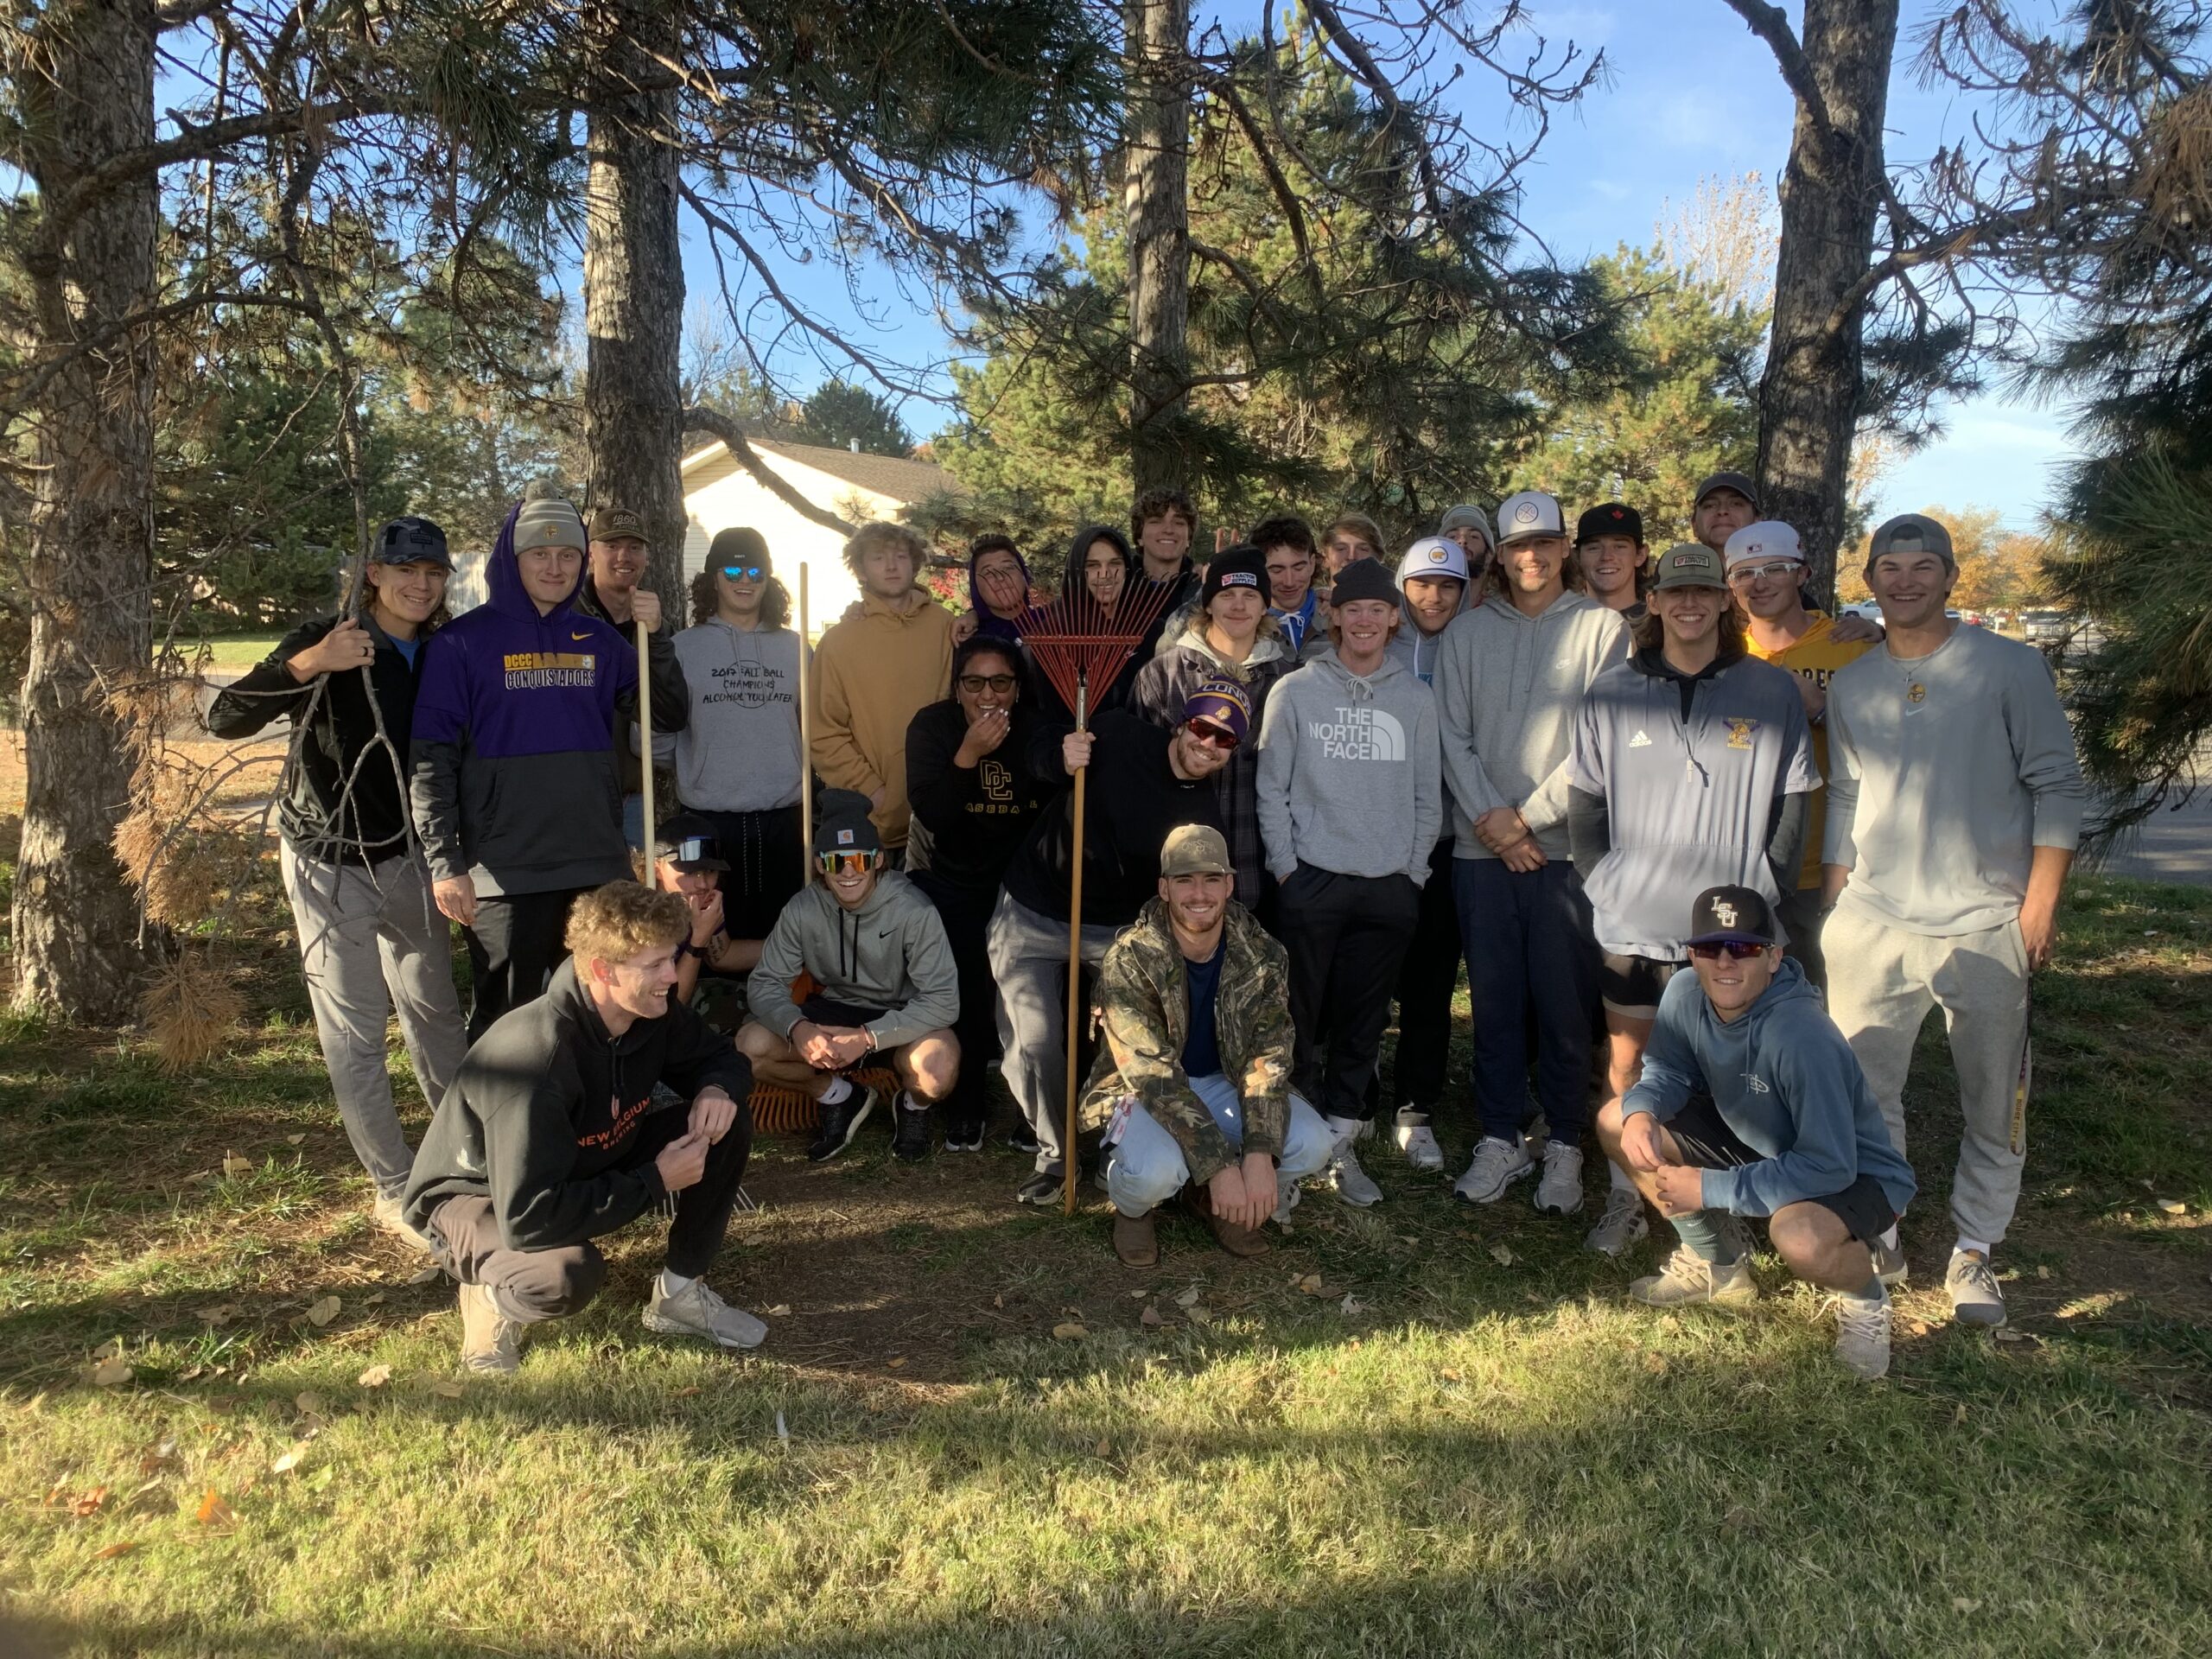 On Sunday, Nov. 14, members of the DC3 baseball team partnered with Ford County RSVP for the annual Fall Cleanup Day for Dodge City area senior citizens. [Photo by Annalynn Kirkhart]